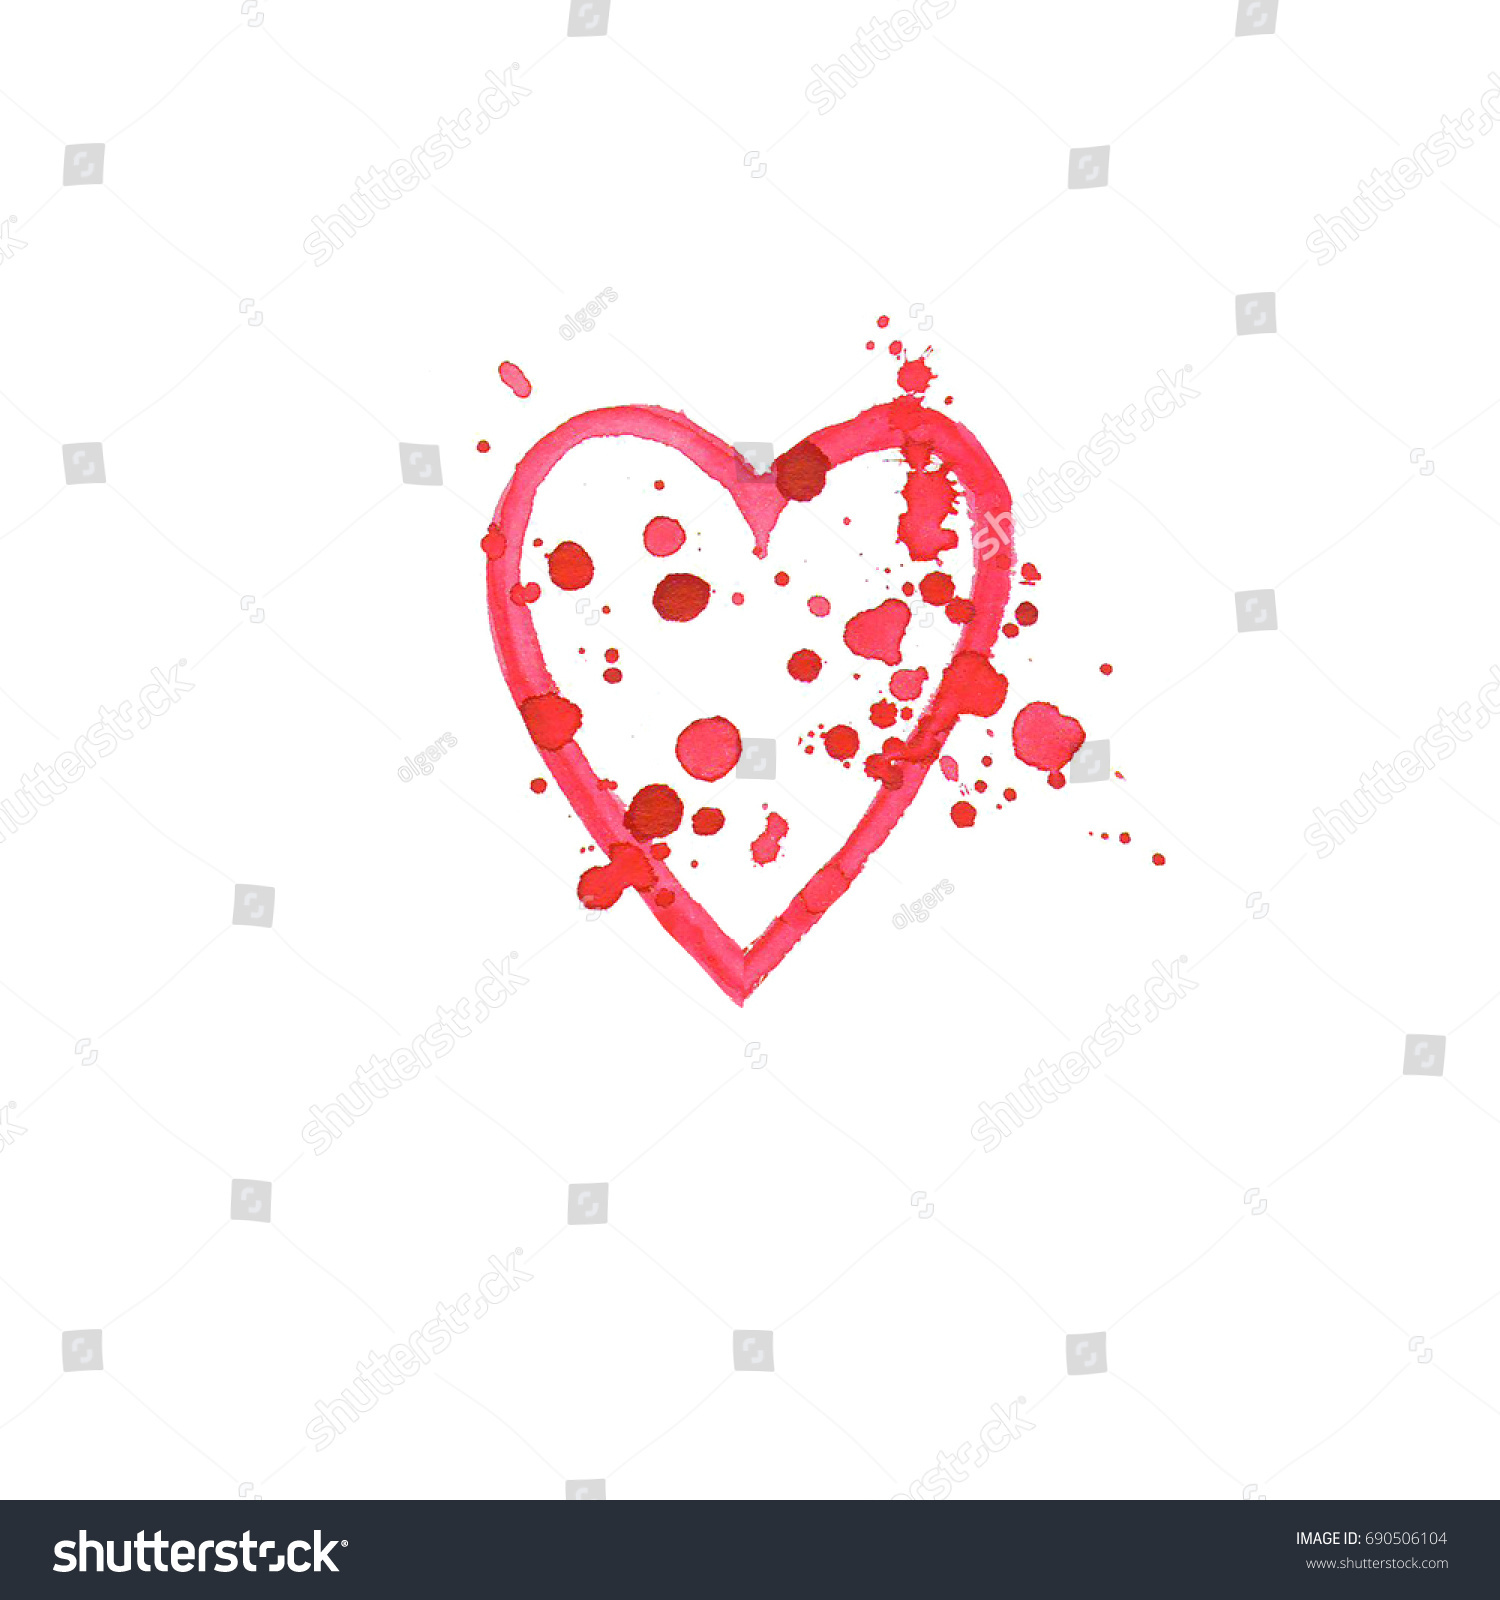 Watercolor Hand Drawn Heart Stains On Stock Illustration 690506104 ...